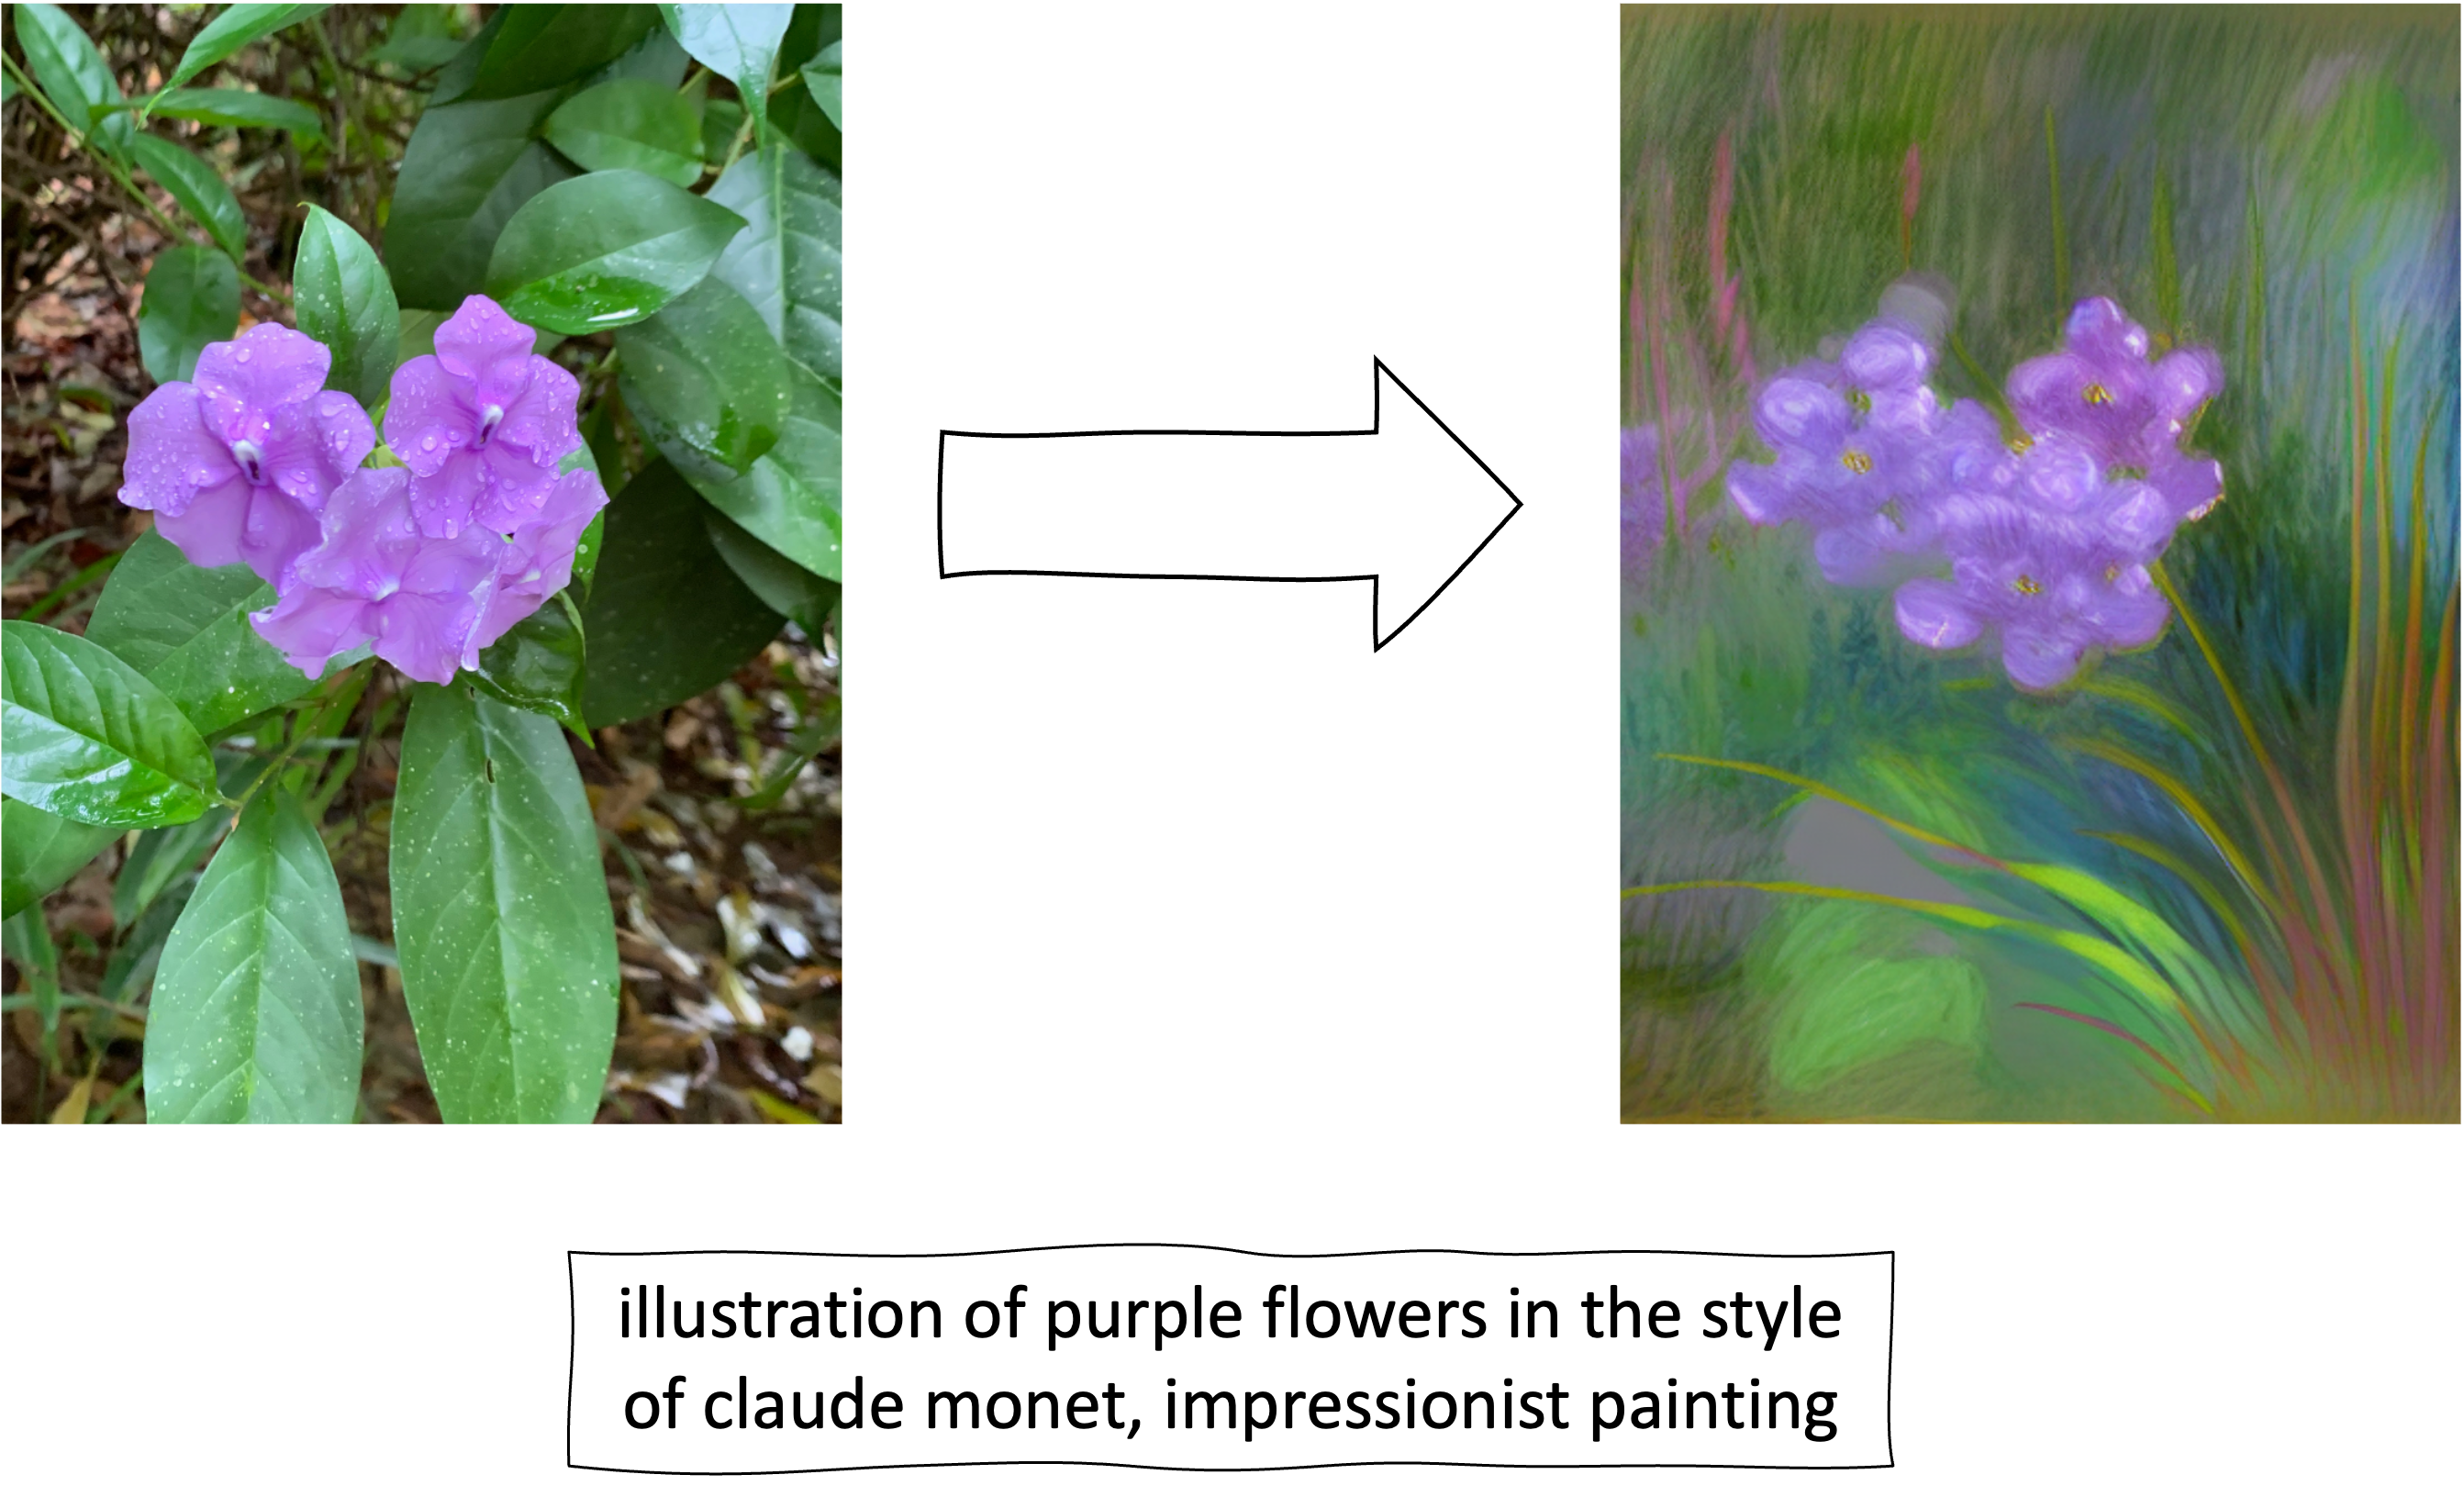 A diagram. On the left, a picture of purple flowers. An arrow pointing rightward towards an AI rendering of the flowers in an impressionist style. Below the arrow, a text box reading 'illustration of purple flowers in the style of claude monet, impressionist painting.'